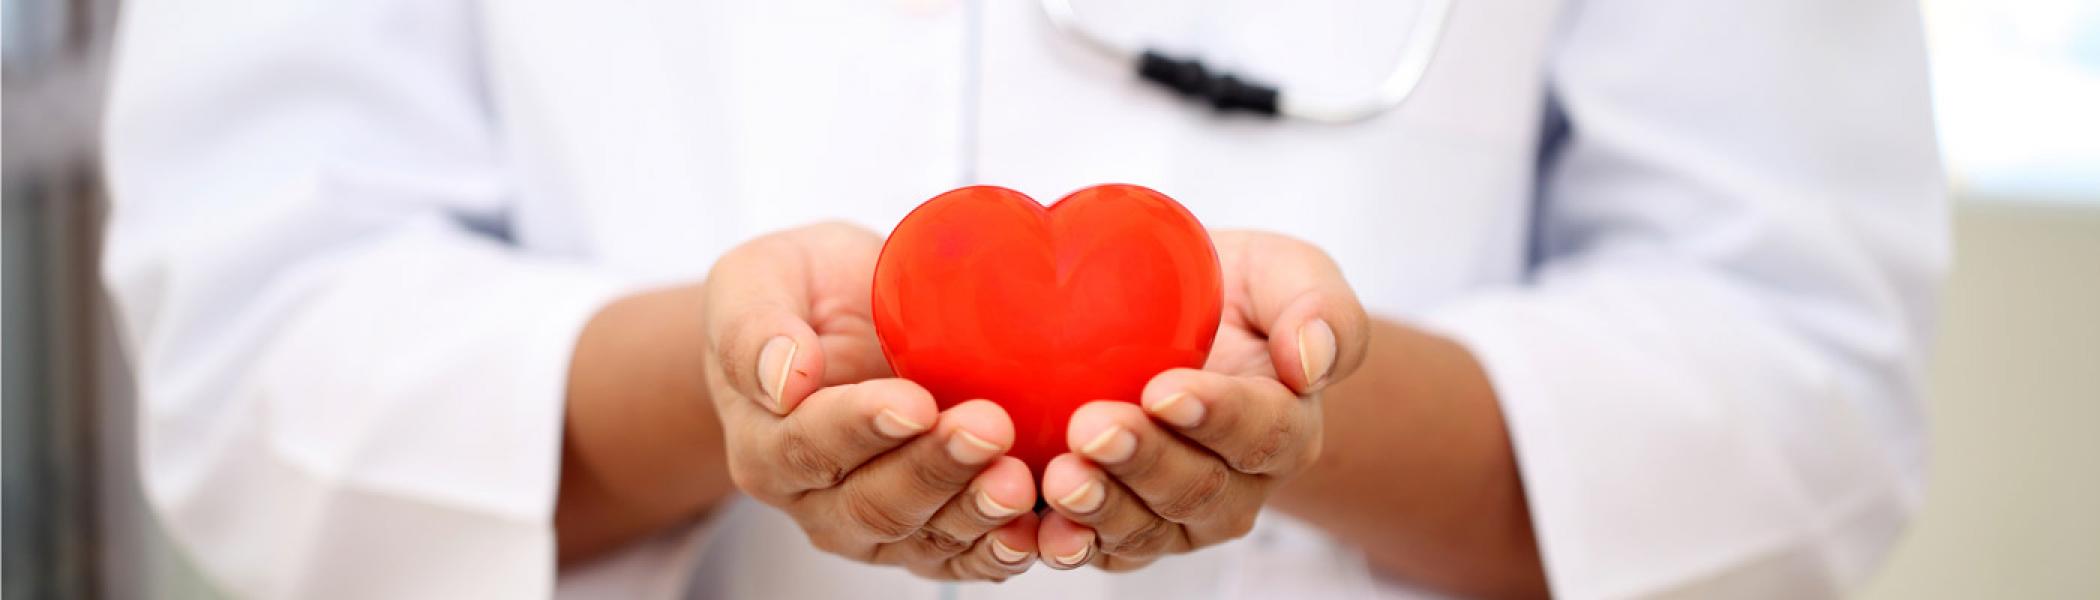 Medical professional holding a heart shape in their open hands. 